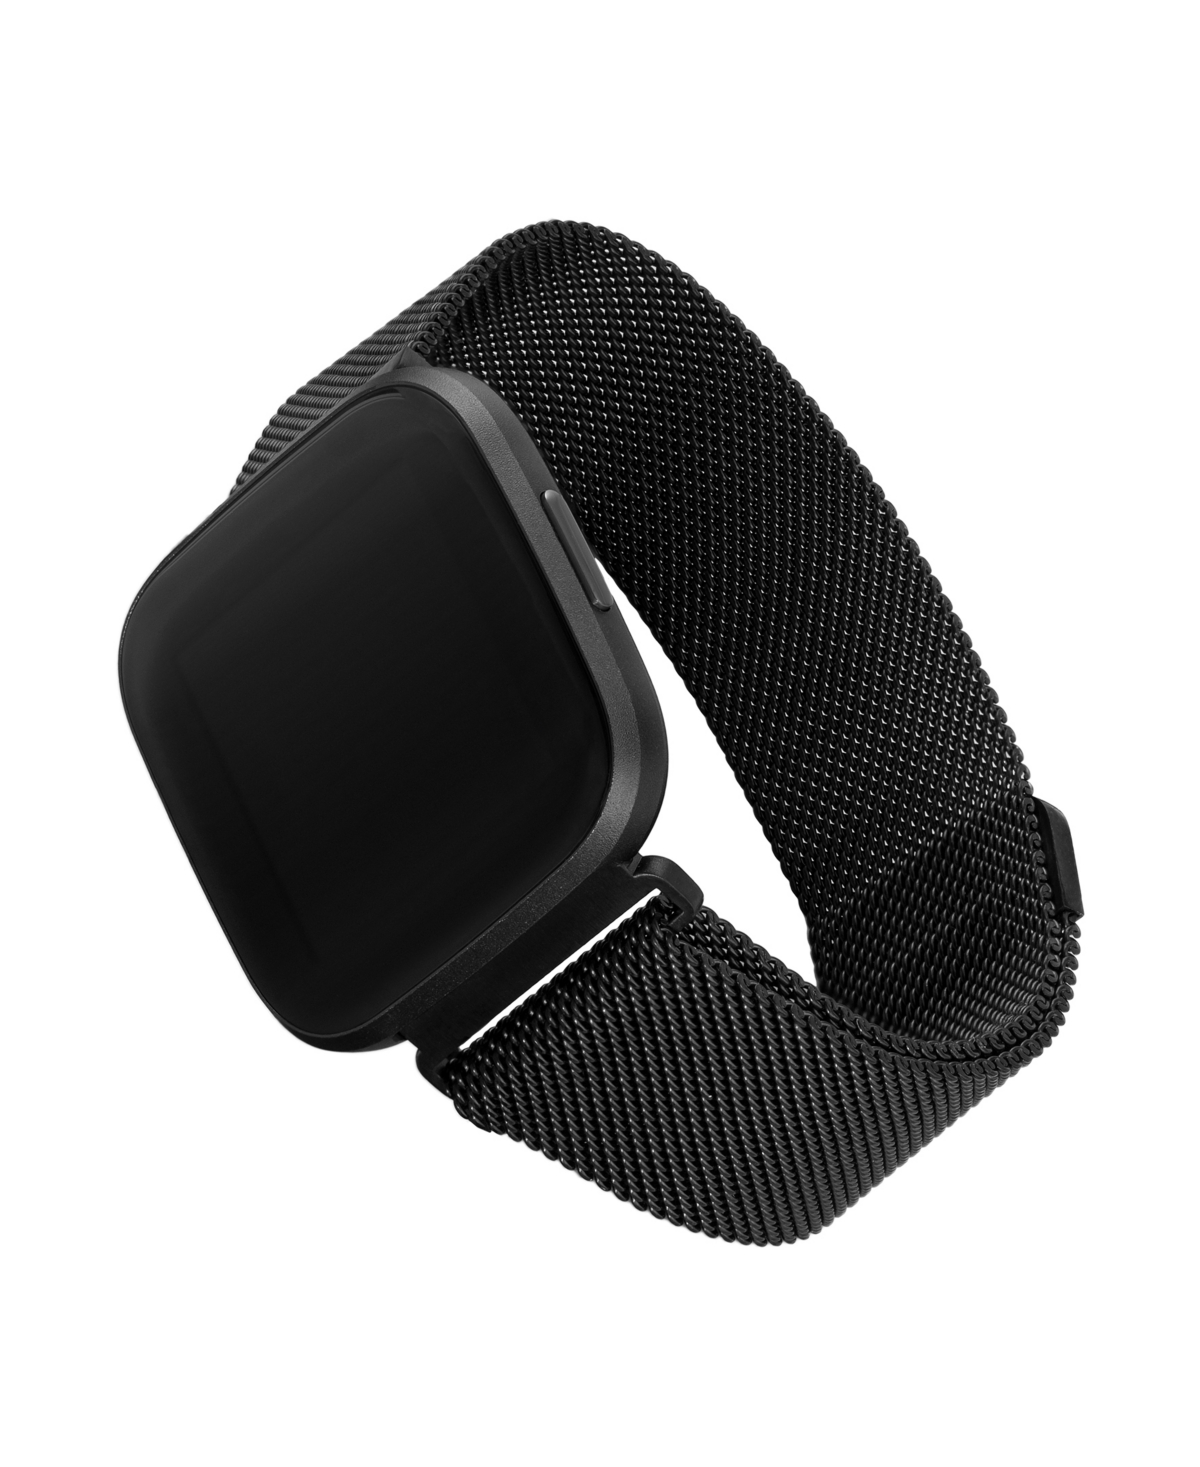 Black Stainless Steel Mesh Band Compatible with the Fitbit Versa and Fitbit Versa 2 - Black, Gray